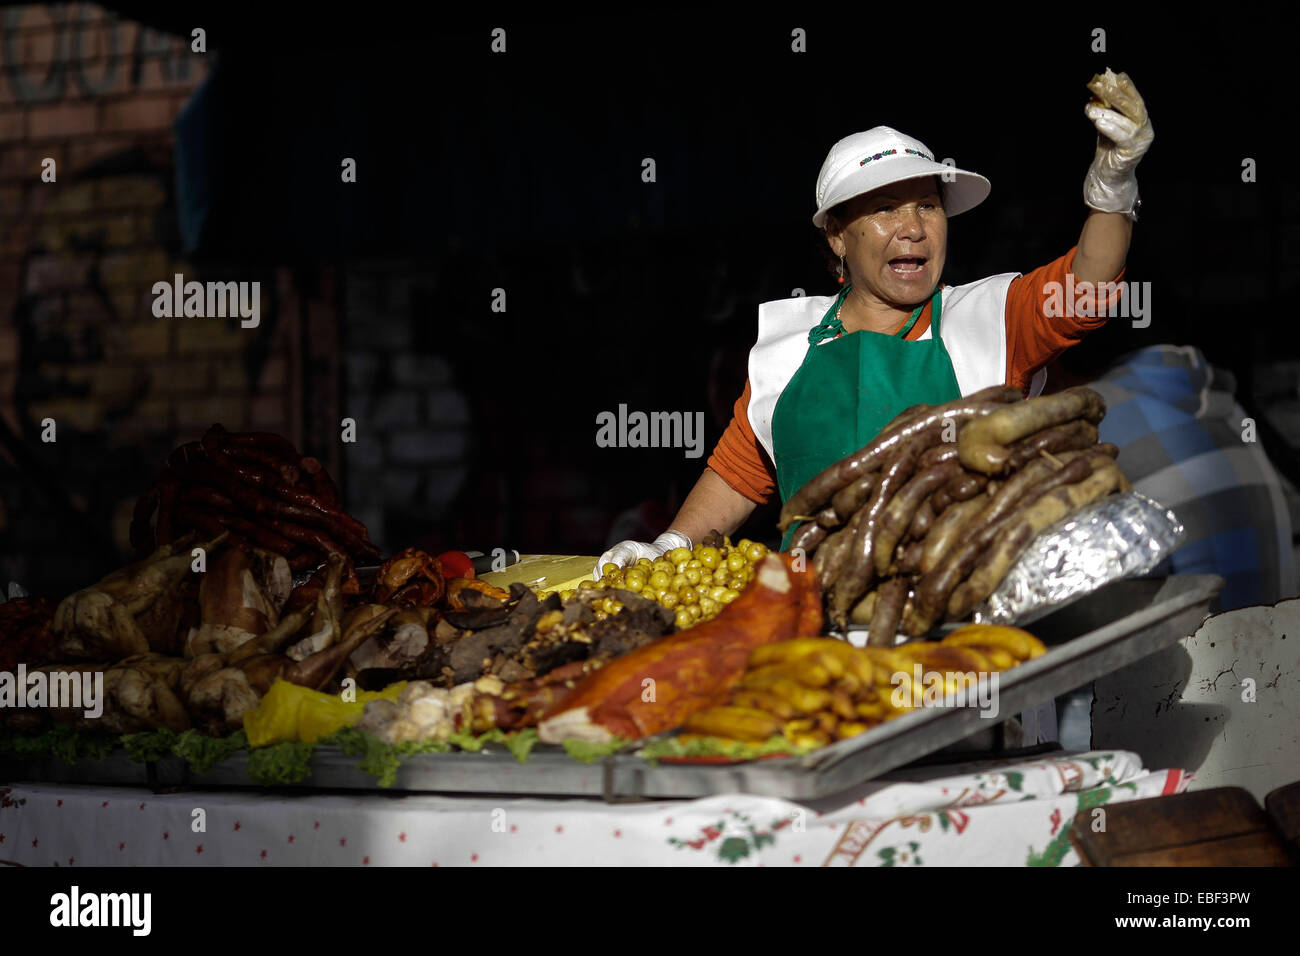 Bogota, Colombia. 29th Nov, 2014. A woman sells food during the 18th Chicha and Corn Festival, in Bogota, capital of Colombia, on Nov. 29, 2014. The chicha comes from the fermentation of corn. © Jhon Paz/Xinhua/Alamy Live News Stock Photo